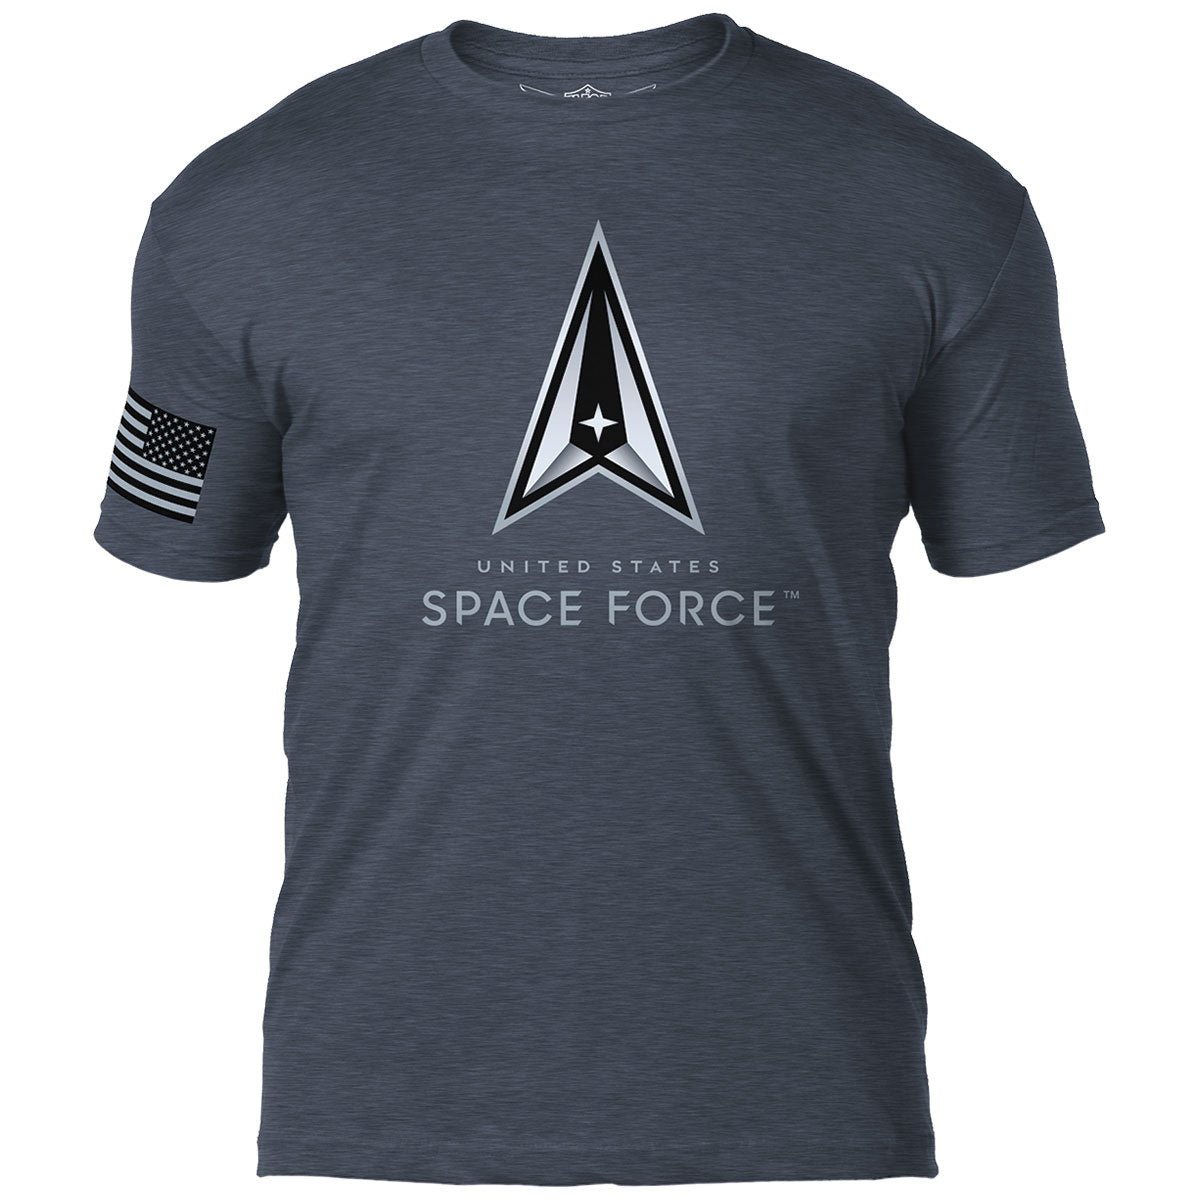 All Space Force Products